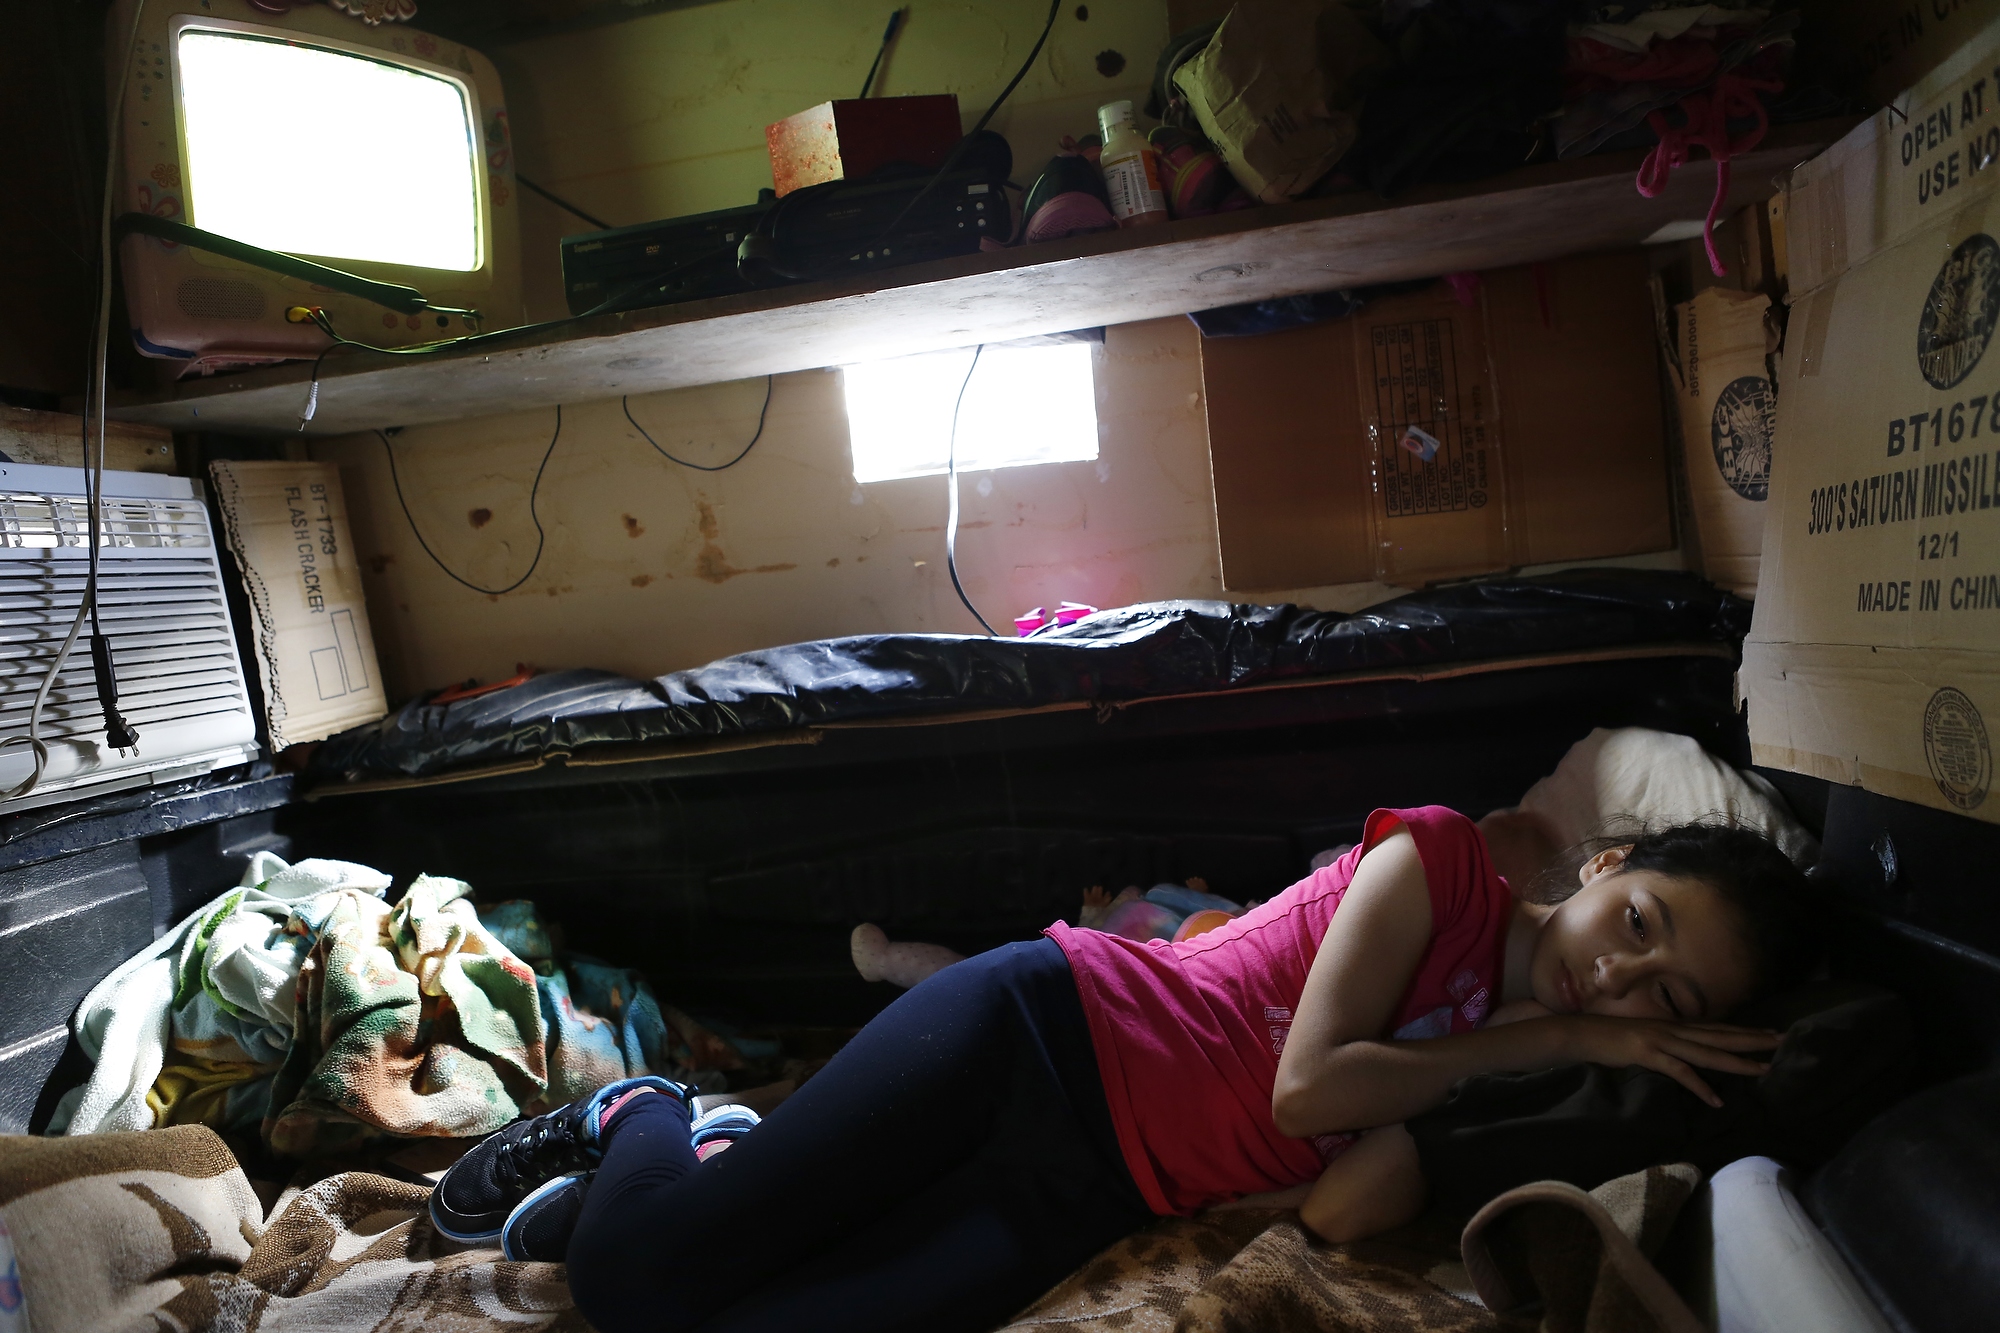 Briana rests during the USA World Cup game in the air-conditioned sleeping compartment attached to the truck that Nelson built, Hidalgo, Texas, July 1, 2014.